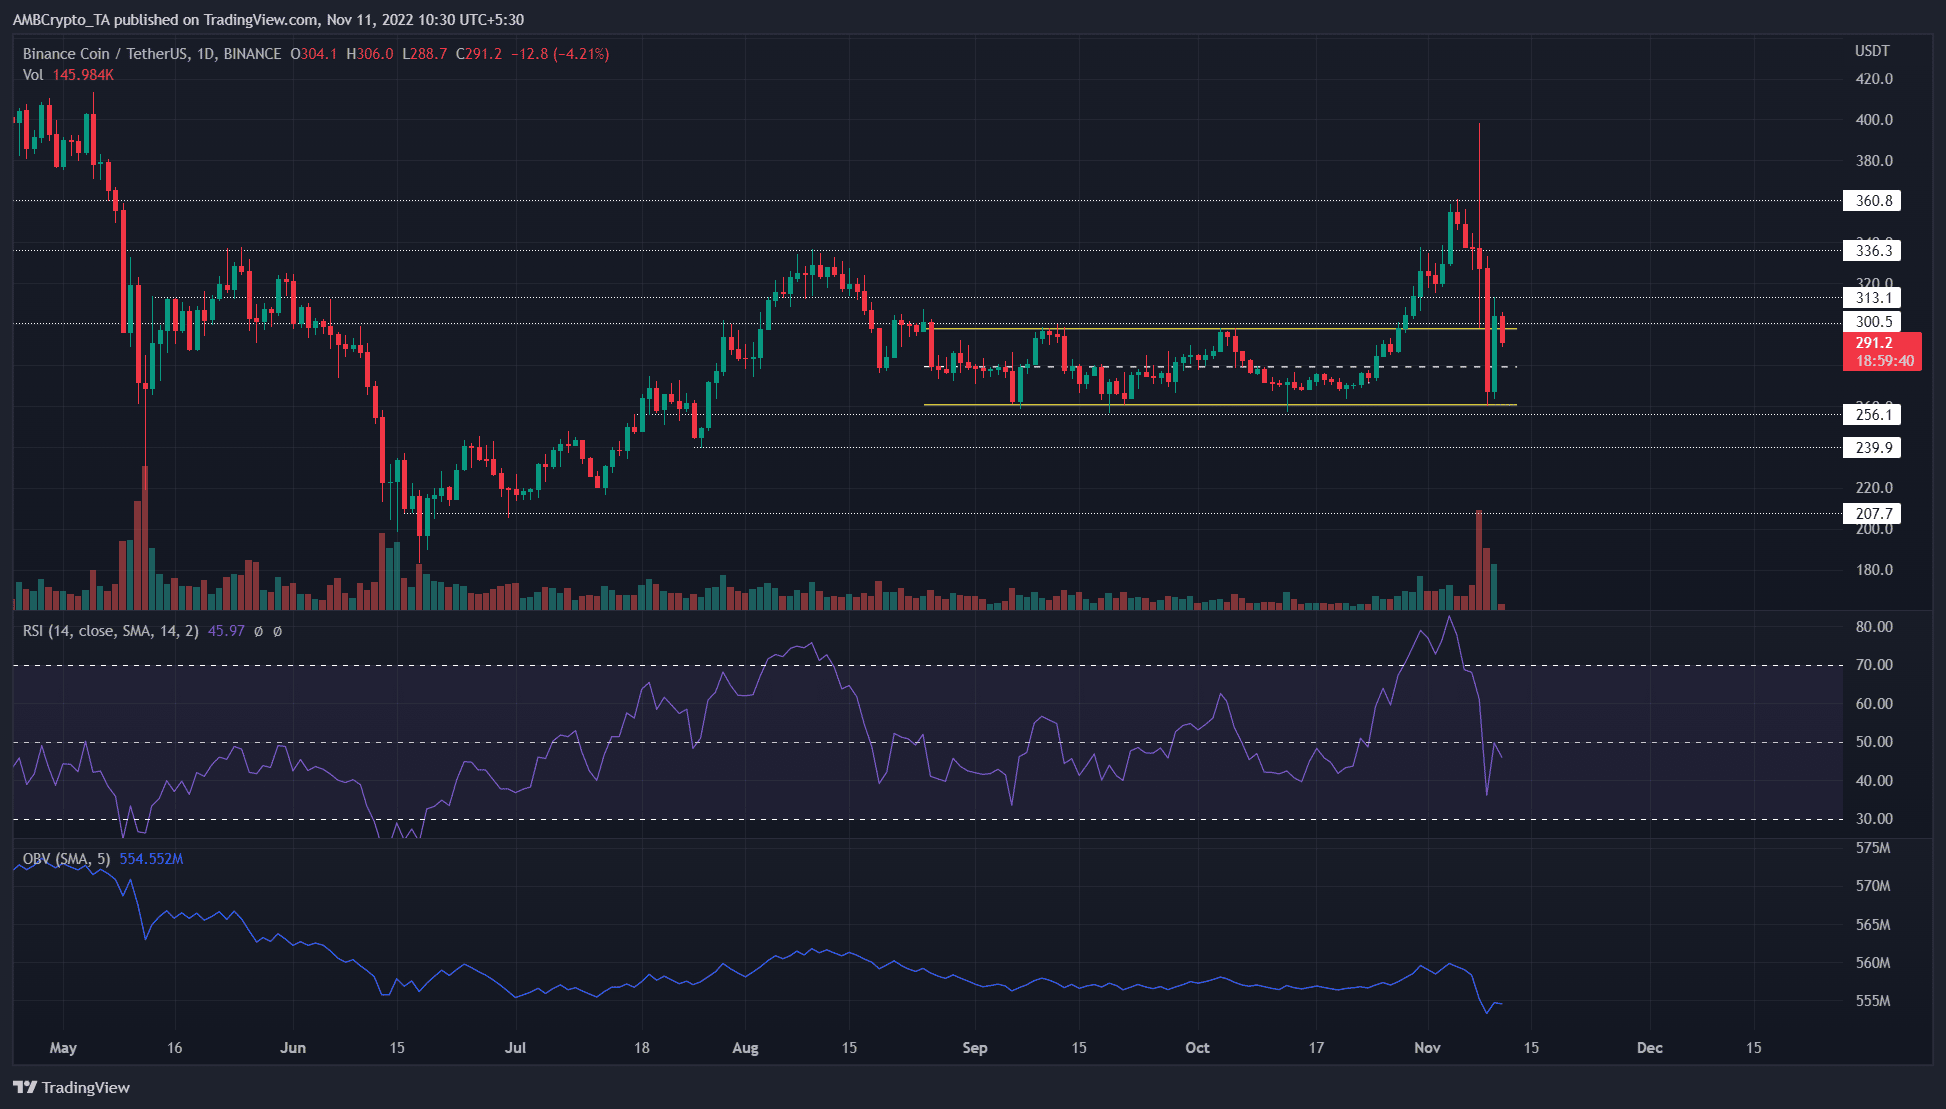 Binance Coin retests $315 as resistance, bears pick up strength yet again